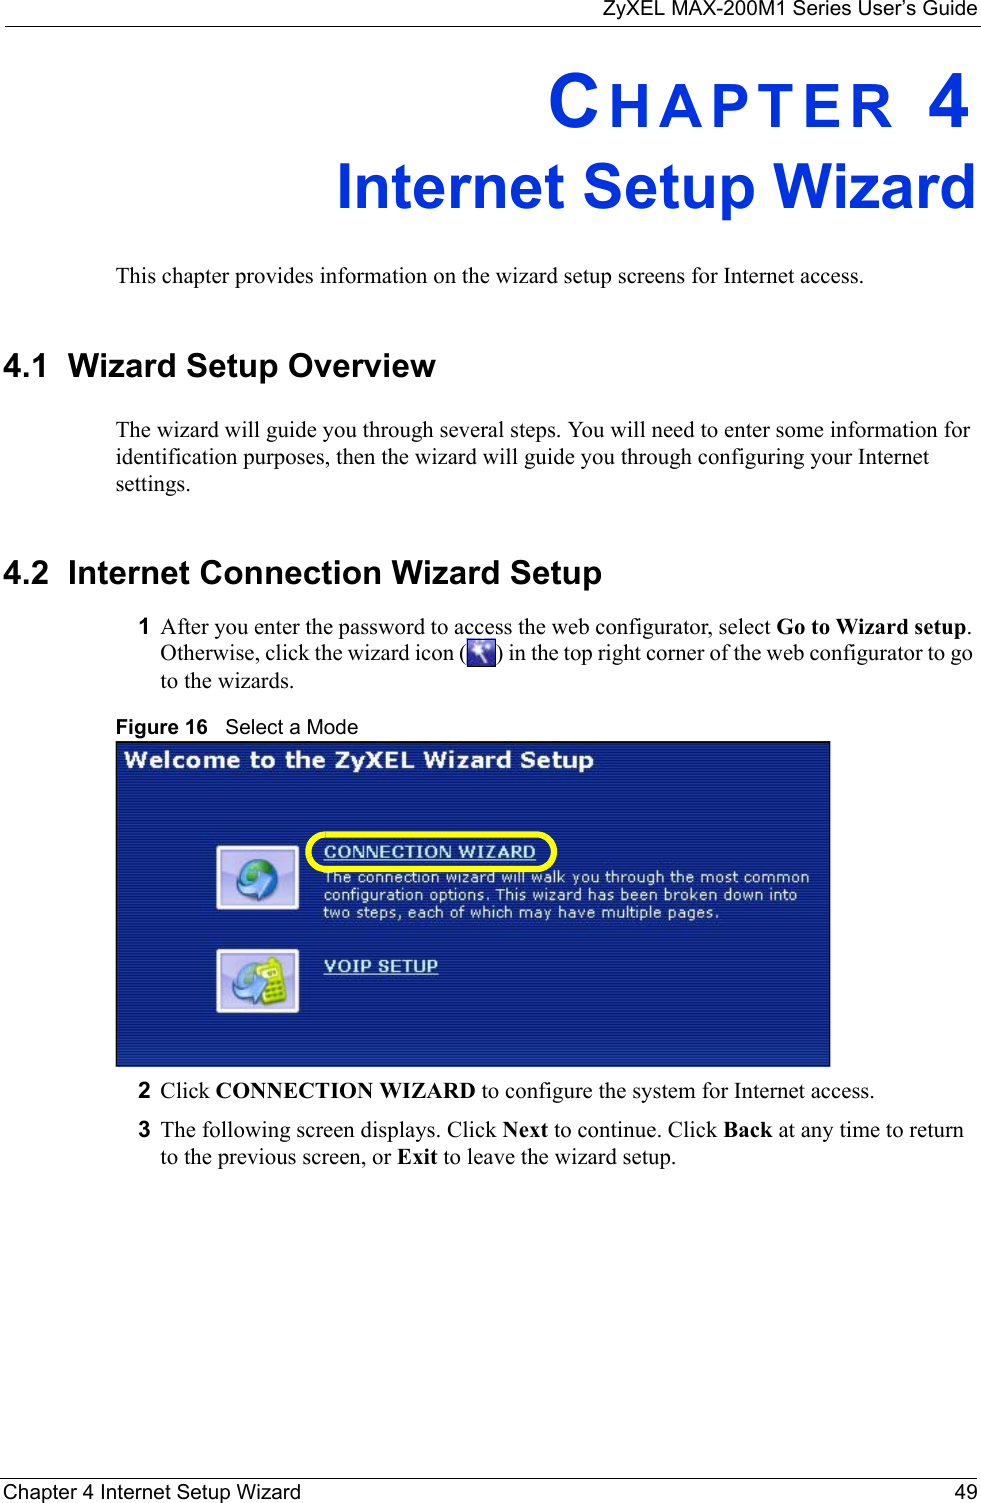 ZyXEL MAX-200M1 Series User’s GuideChapter 4 Internet Setup Wizard 49CHAPTER 4Internet Setup WizardThis chapter provides information on the wizard setup screens for Internet access.4.1  Wizard Setup OverviewThe wizard will guide you through several steps. You will need to enter some information for identification purposes, then the wizard will guide you through configuring your Internet settings.4.2  Internet Connection Wizard Setup1After you enter the password to access the web configurator, select Go to Wizard setup. Otherwise, click the wizard icon ( ) in the top right corner of the web configurator to go to the wizards. Figure 16   Select a Mode2Click CONNECTION WIZARD to configure the system for Internet access.3The following screen displays. Click Next to continue. Click Back at any time to return to the previous screen, or Exit to leave the wizard setup.